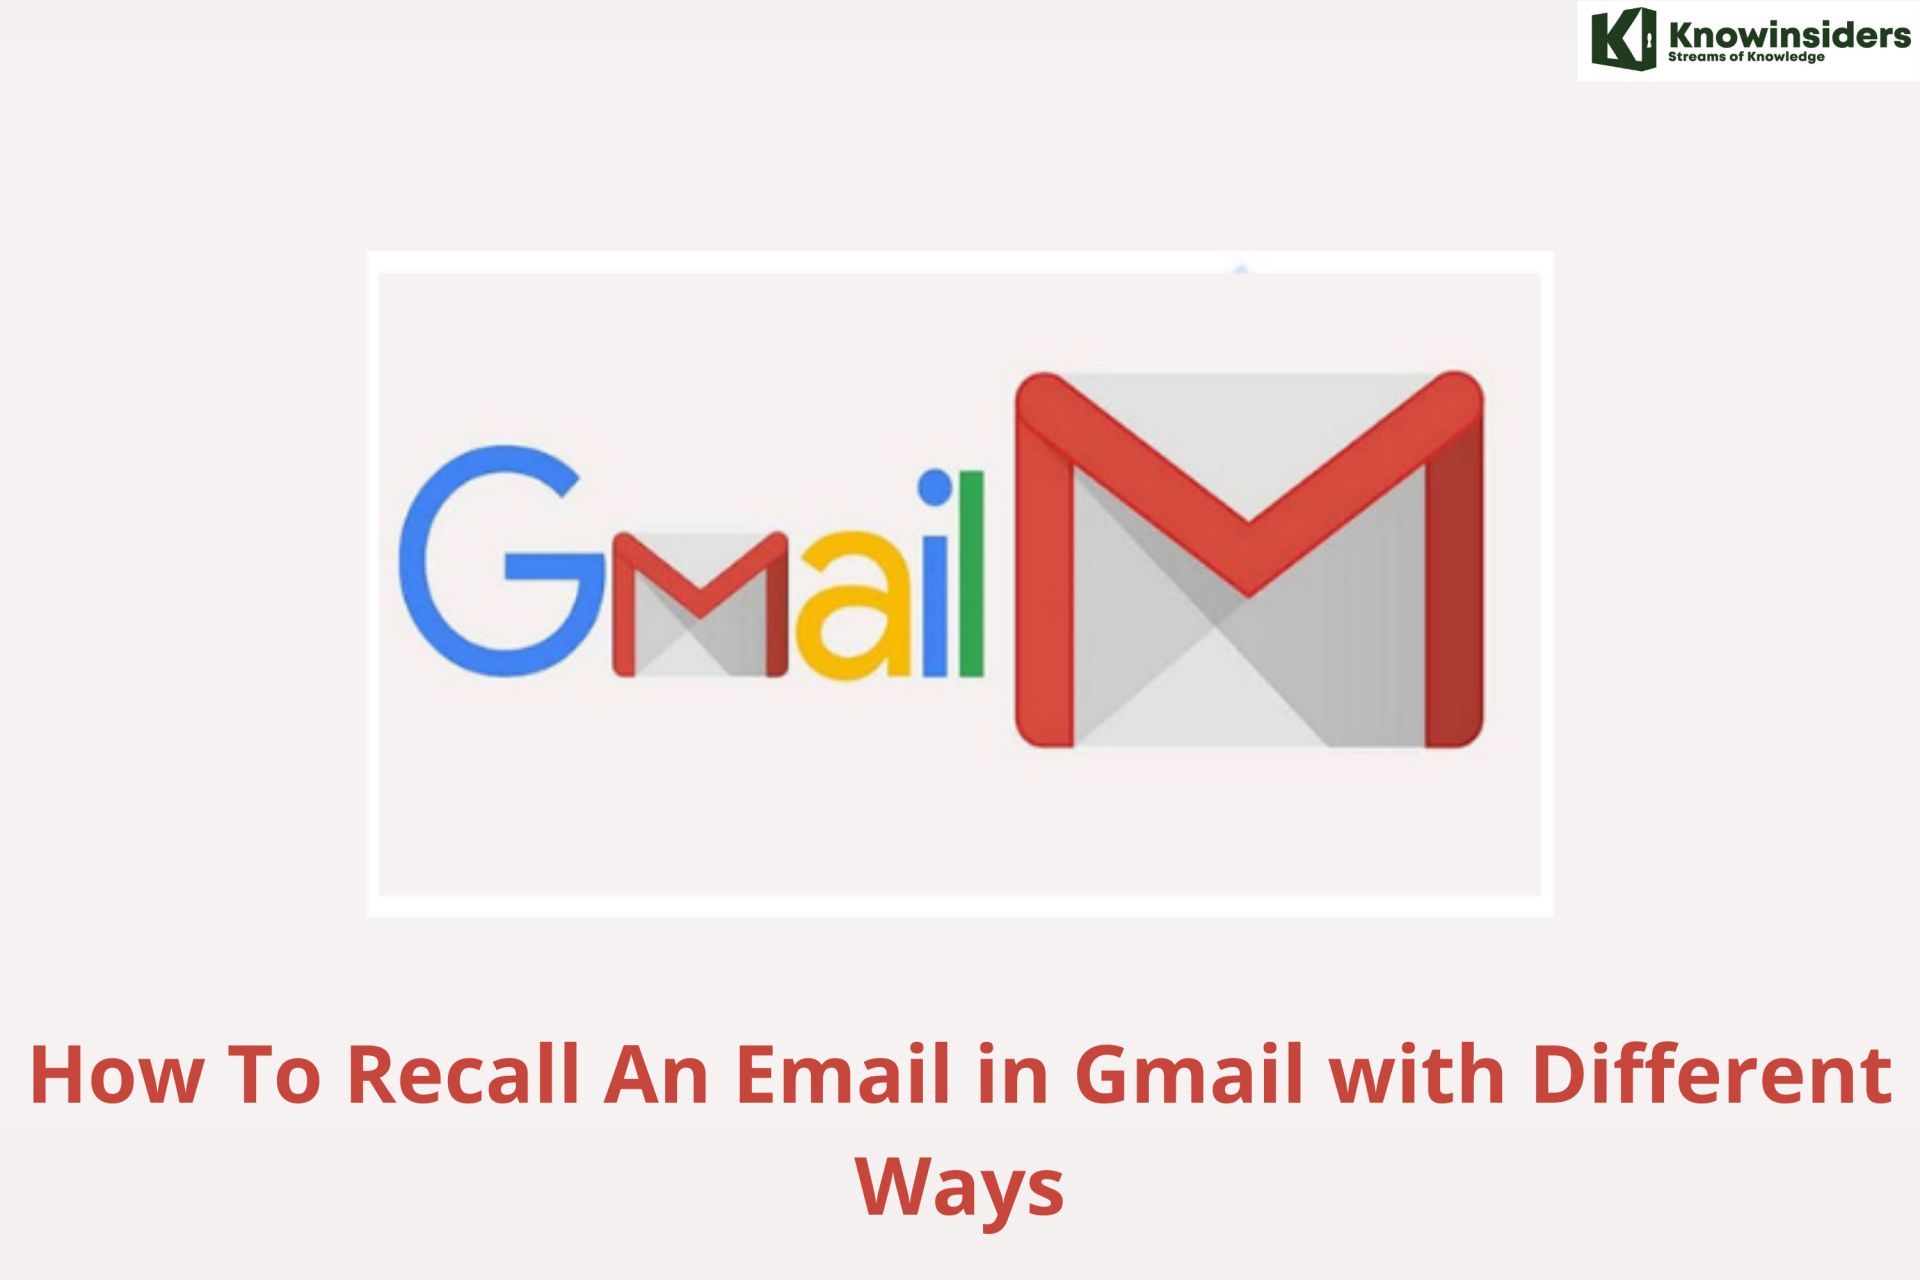 How To Recall An Email in Gmail on iPhone, Android and Web